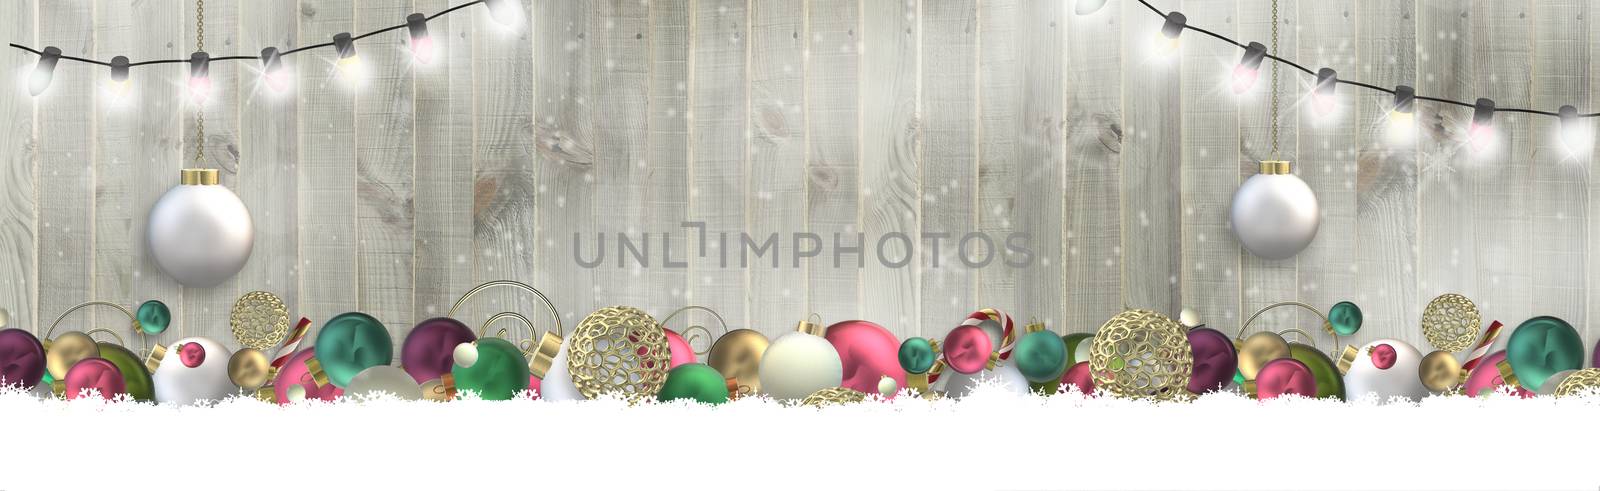 Luxury Christmas New Year party invitation over wood. Xmas 3D realistic balls, snow, light on rustic wood with snowflakes. 3D illustration. Xmas holiday horizontal banner, Copy space, place for text